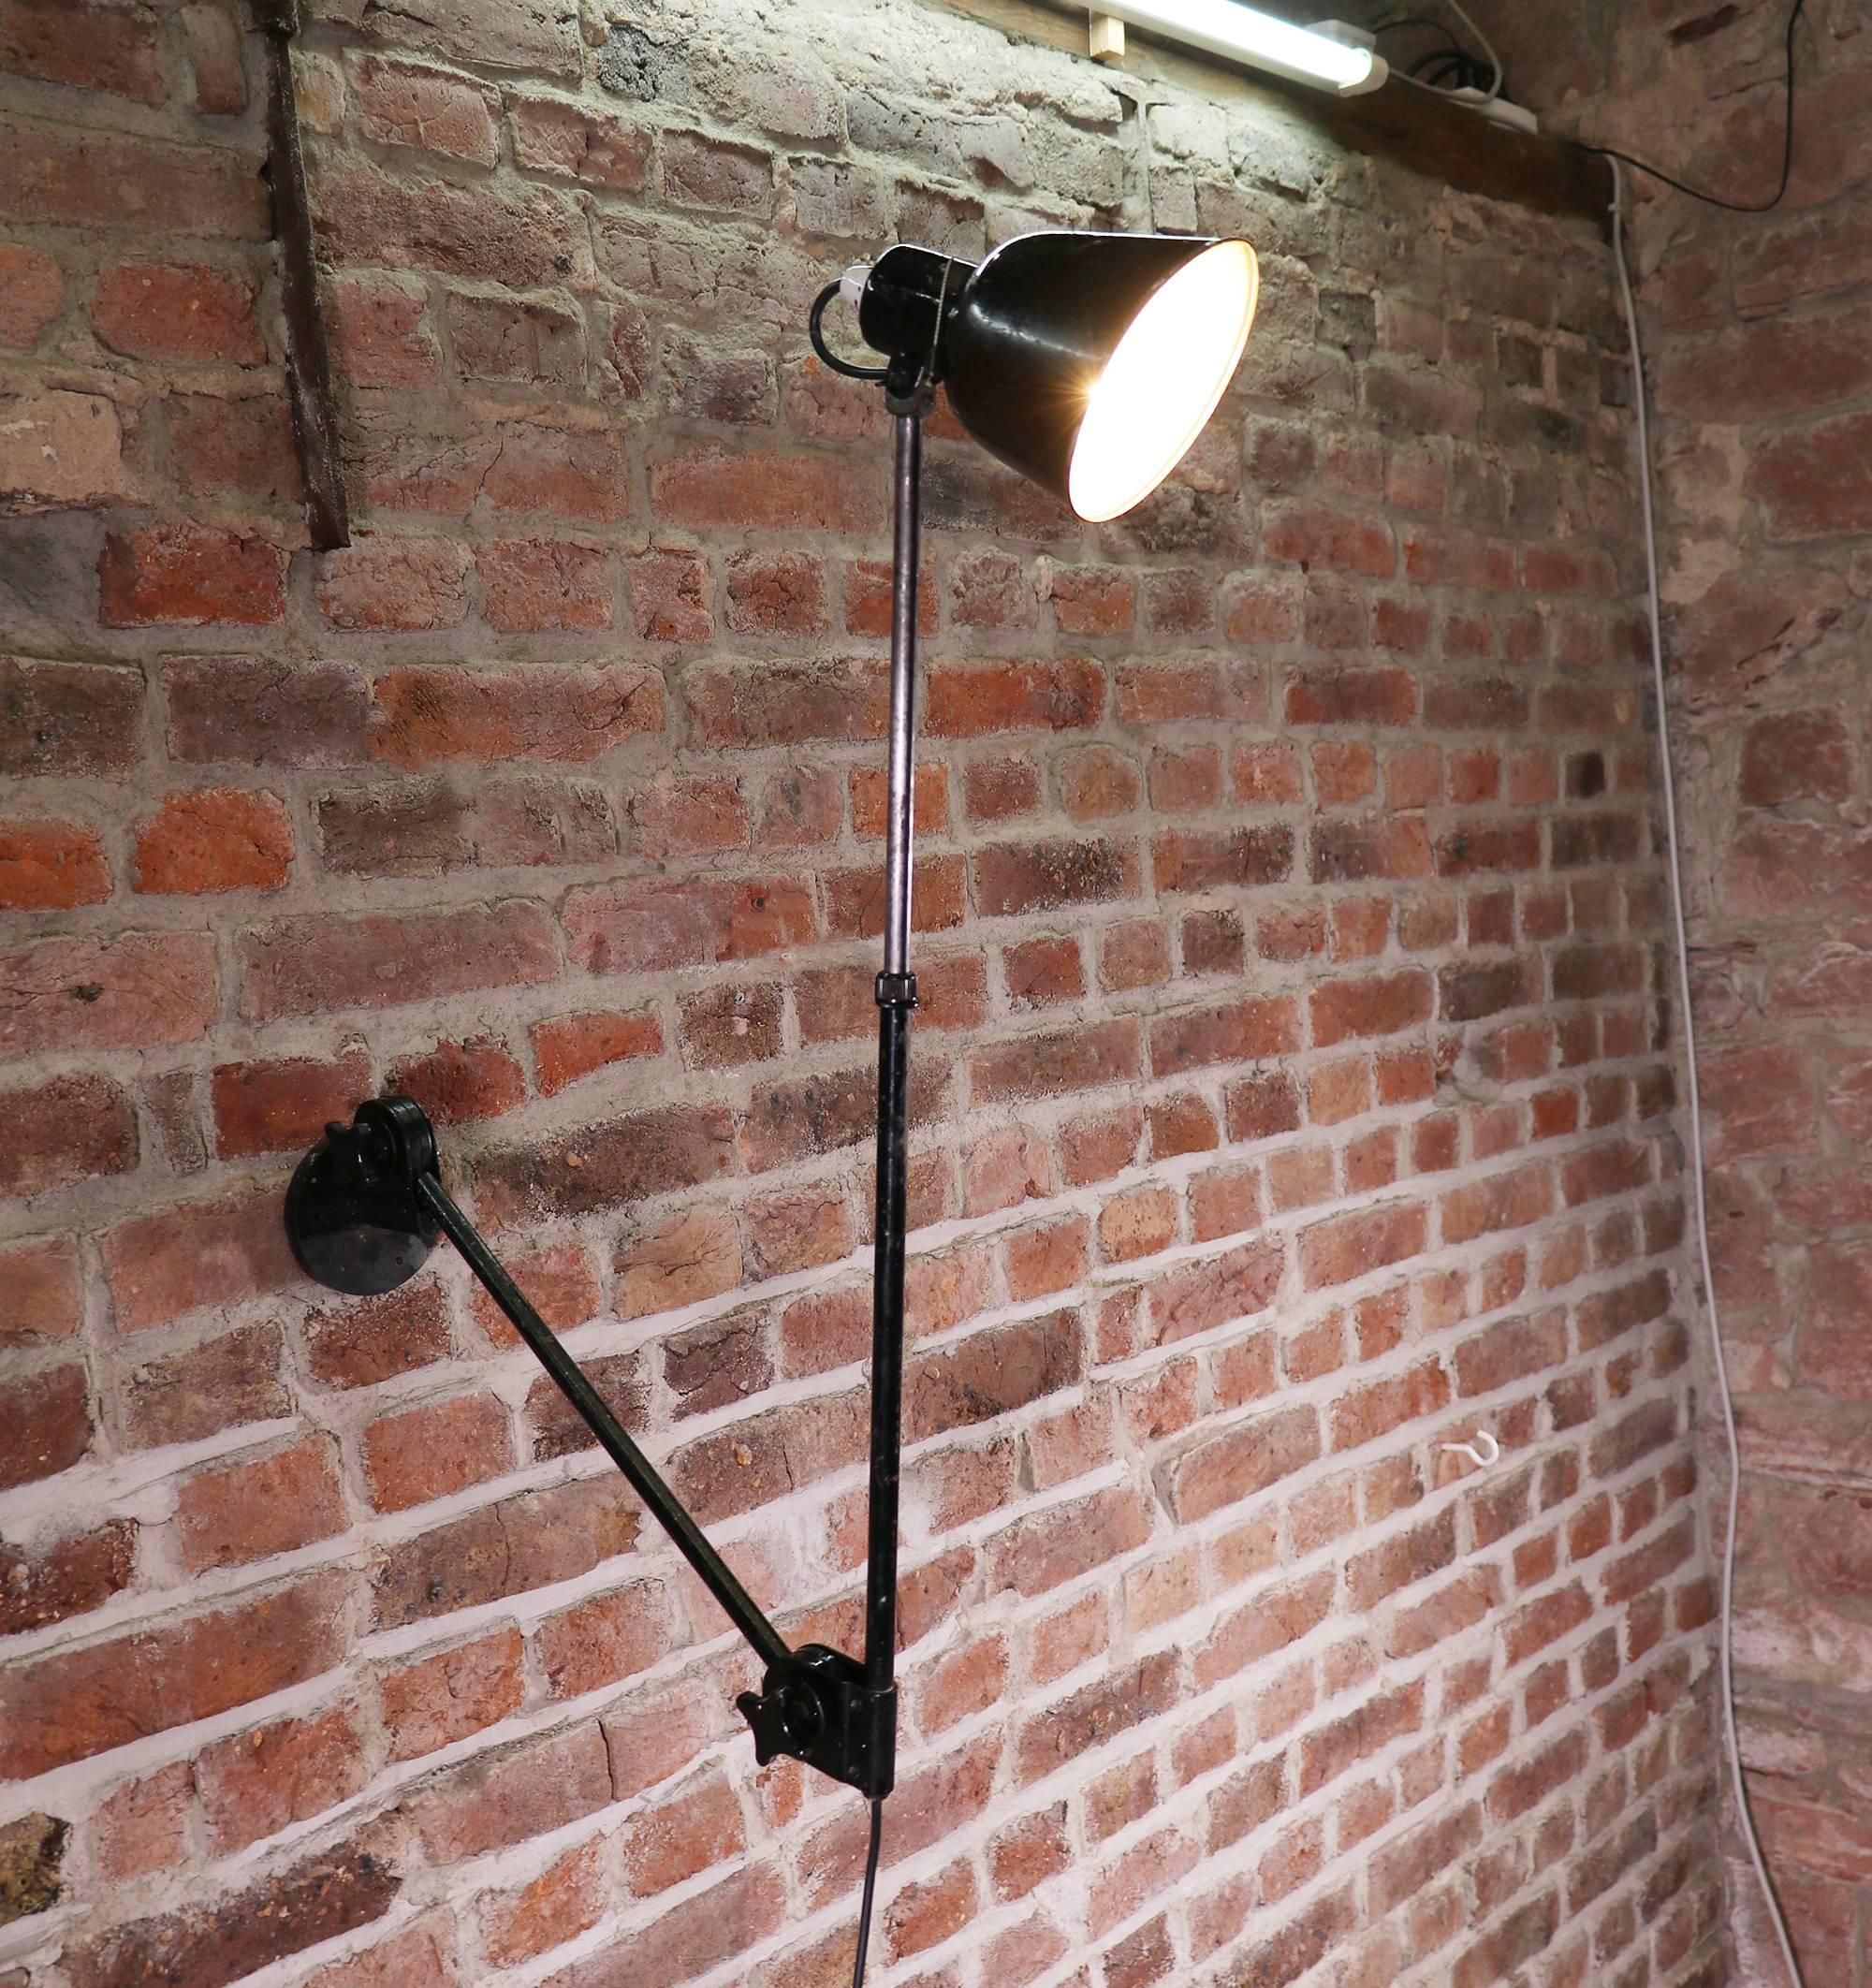 Vintage black industrial adjustable articulated telescopic task lamp made in Germany in the 1920s-1930s. 

Can be used as wall or table lamp.

Wall arm measures max. 44.5